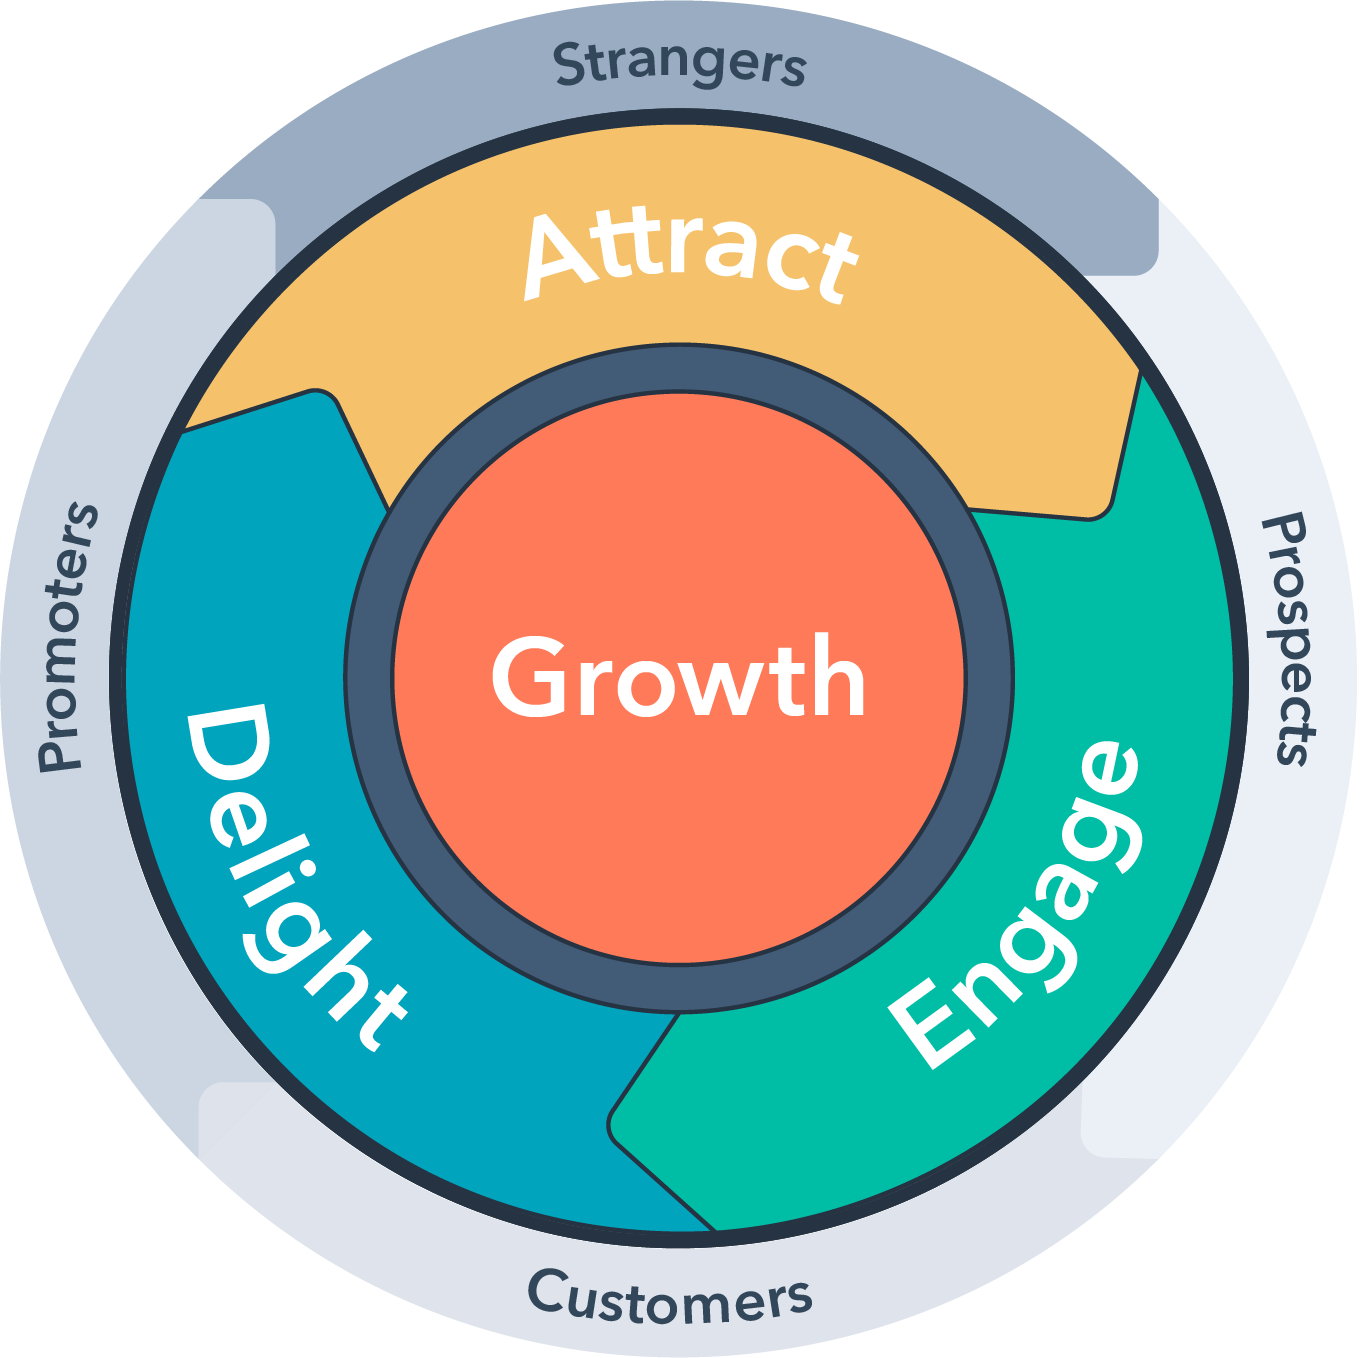 The HubSpot Flywheel. "Growth" is in the center, surrounded by three phases, driving each other in turn: "Attract" driving "Engage" driving "Delight" driving "Attract", etc. An outer ring shows "Strangers" becoming "Prospects" becoming "Customers" and then "Promoters" who attract new "Strangers".